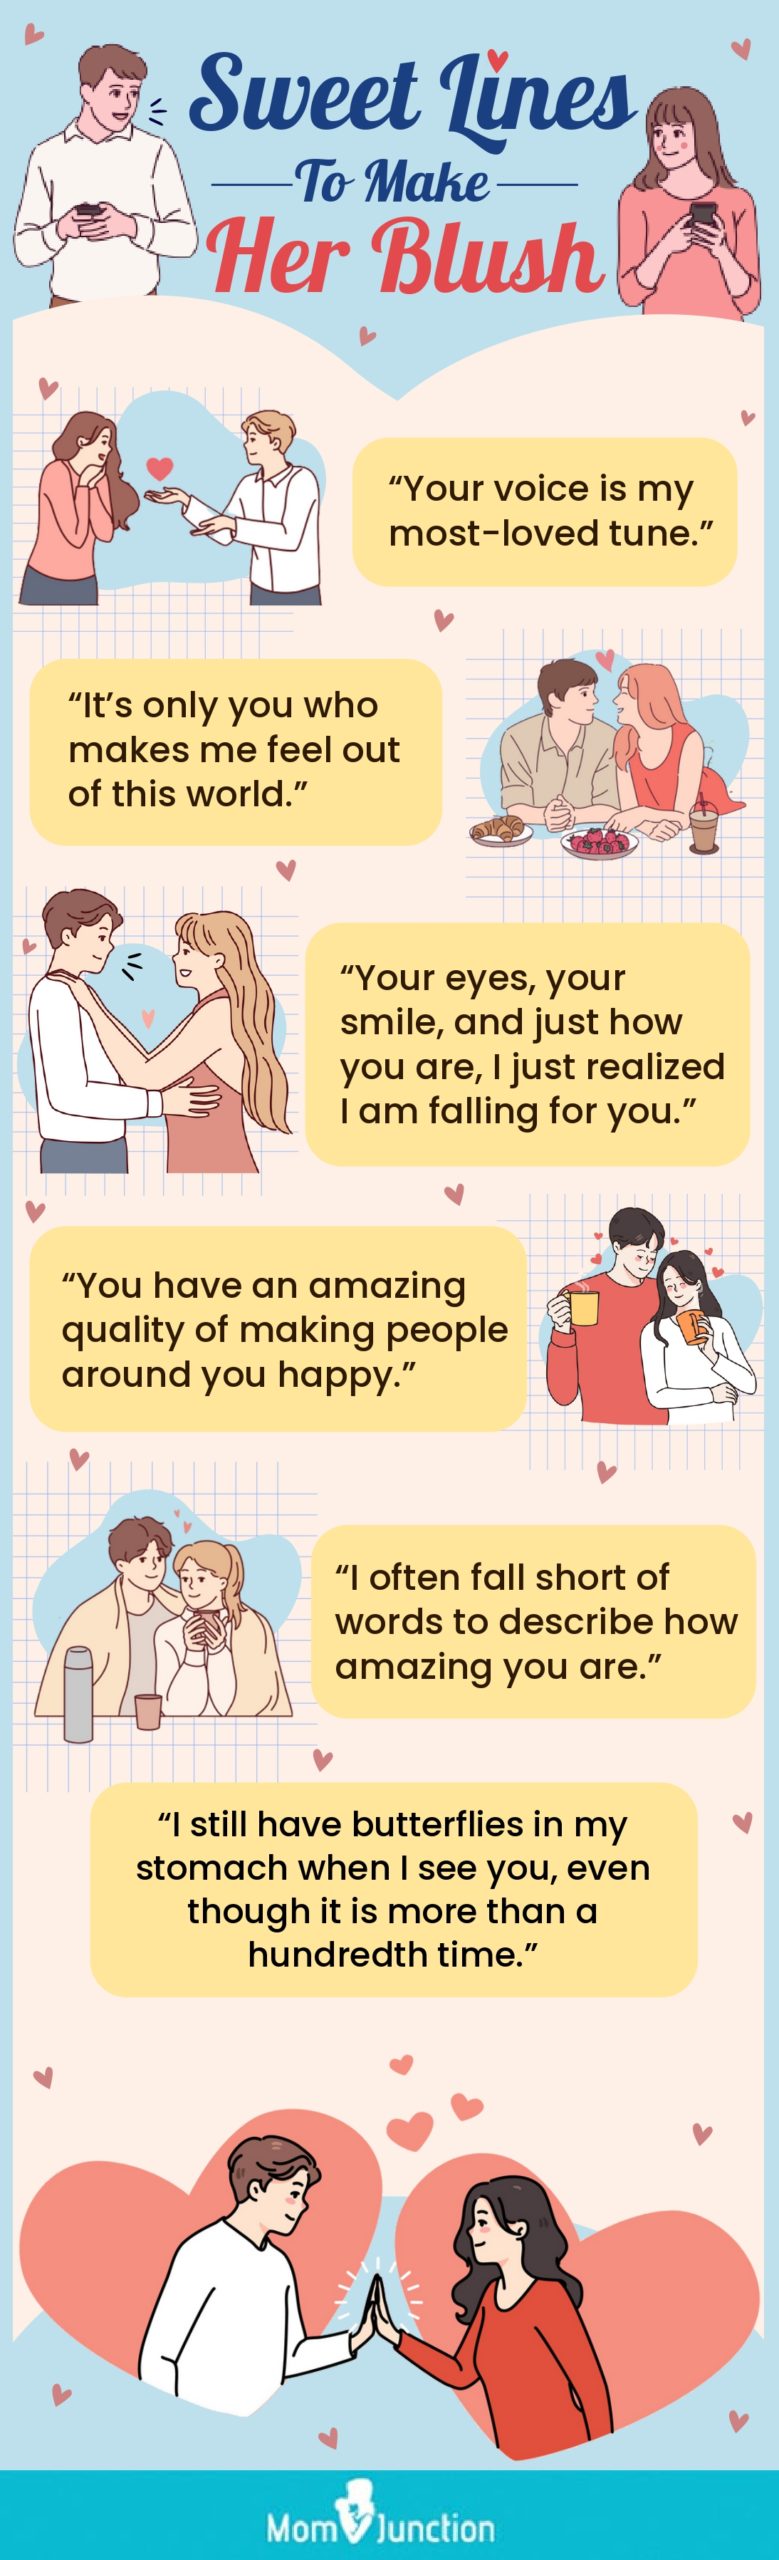 sweet lines to make her blush (infographic)